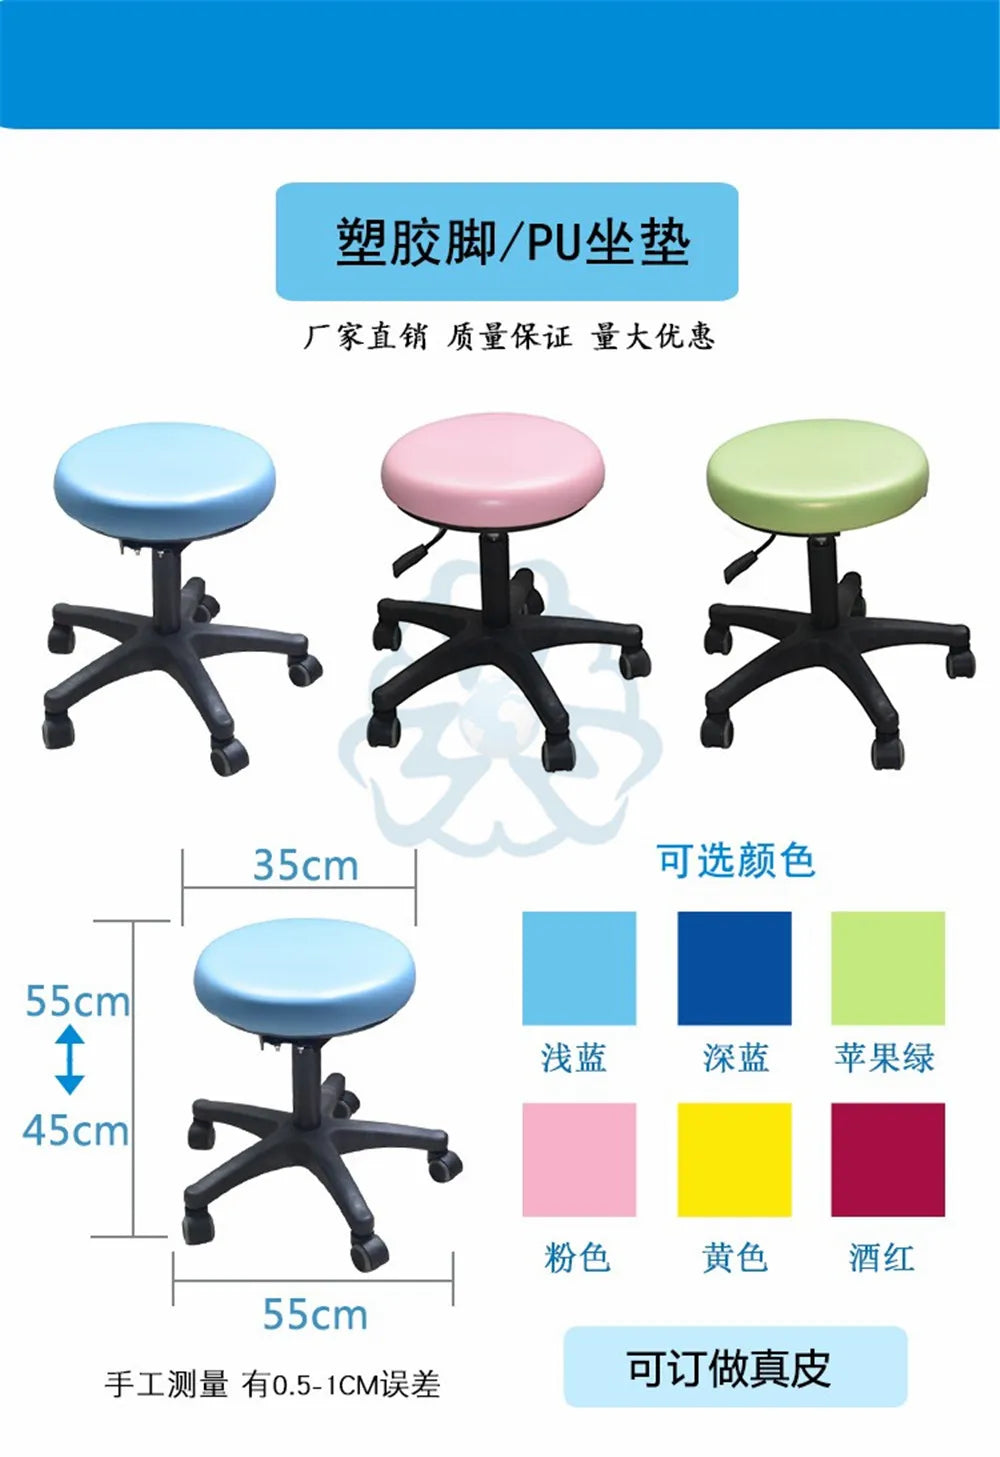 Lifting Rotating Computer Chair Ergonomic Dentist Chair Seat Adjustment Universal Caster Parts Dental Chair Unit For Office